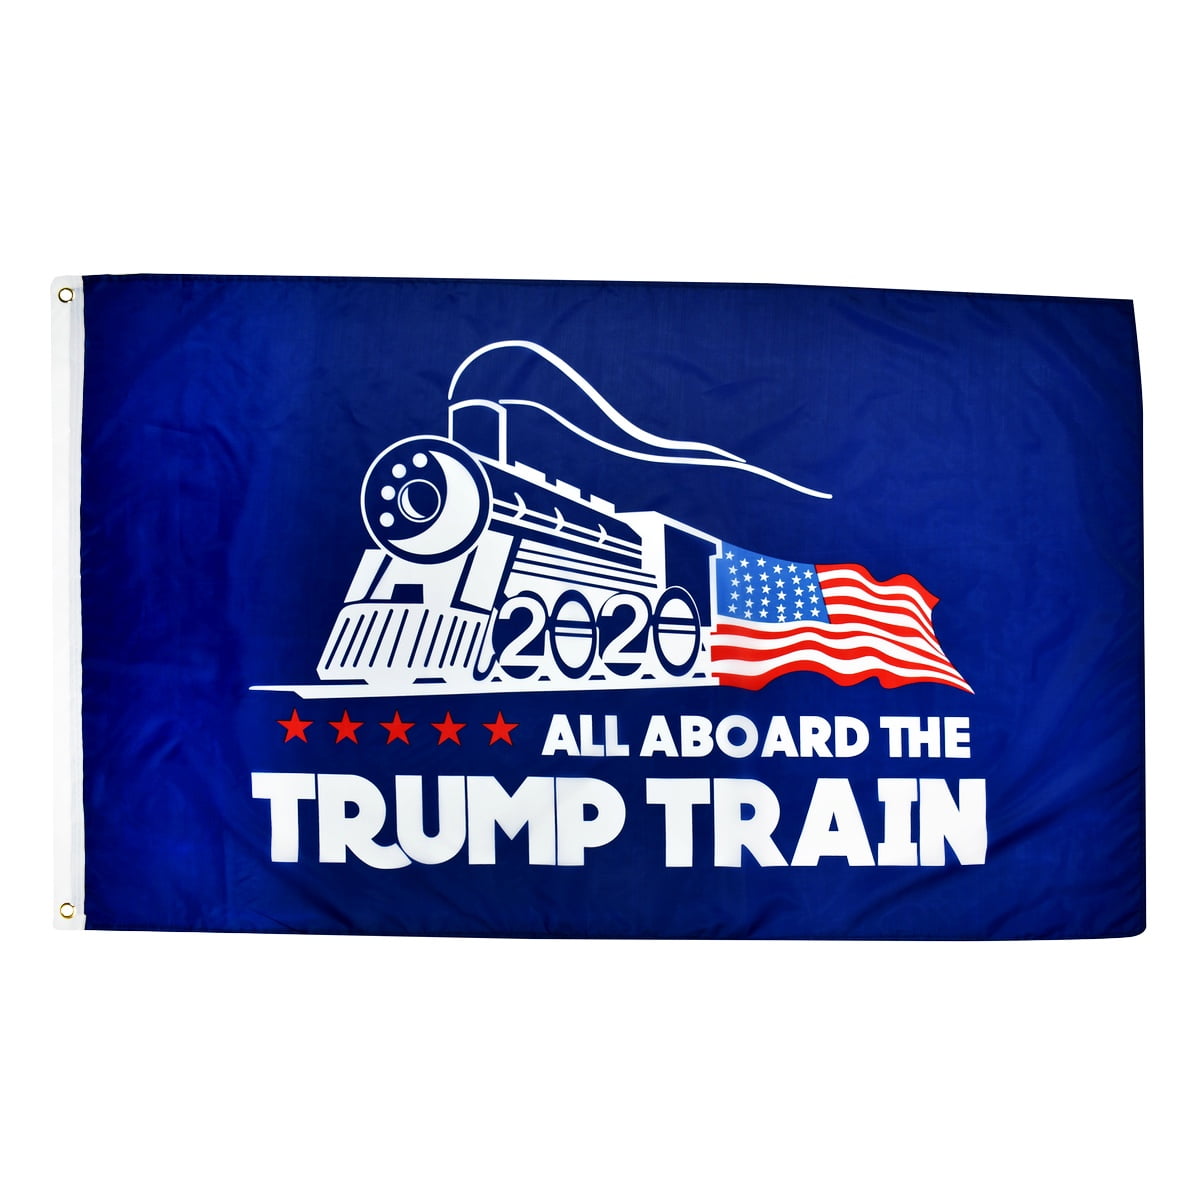 TRUMP KEEP AMERICA GREAT 2020 Advertising Vinyl Banner Flag Sign Many Sizes 